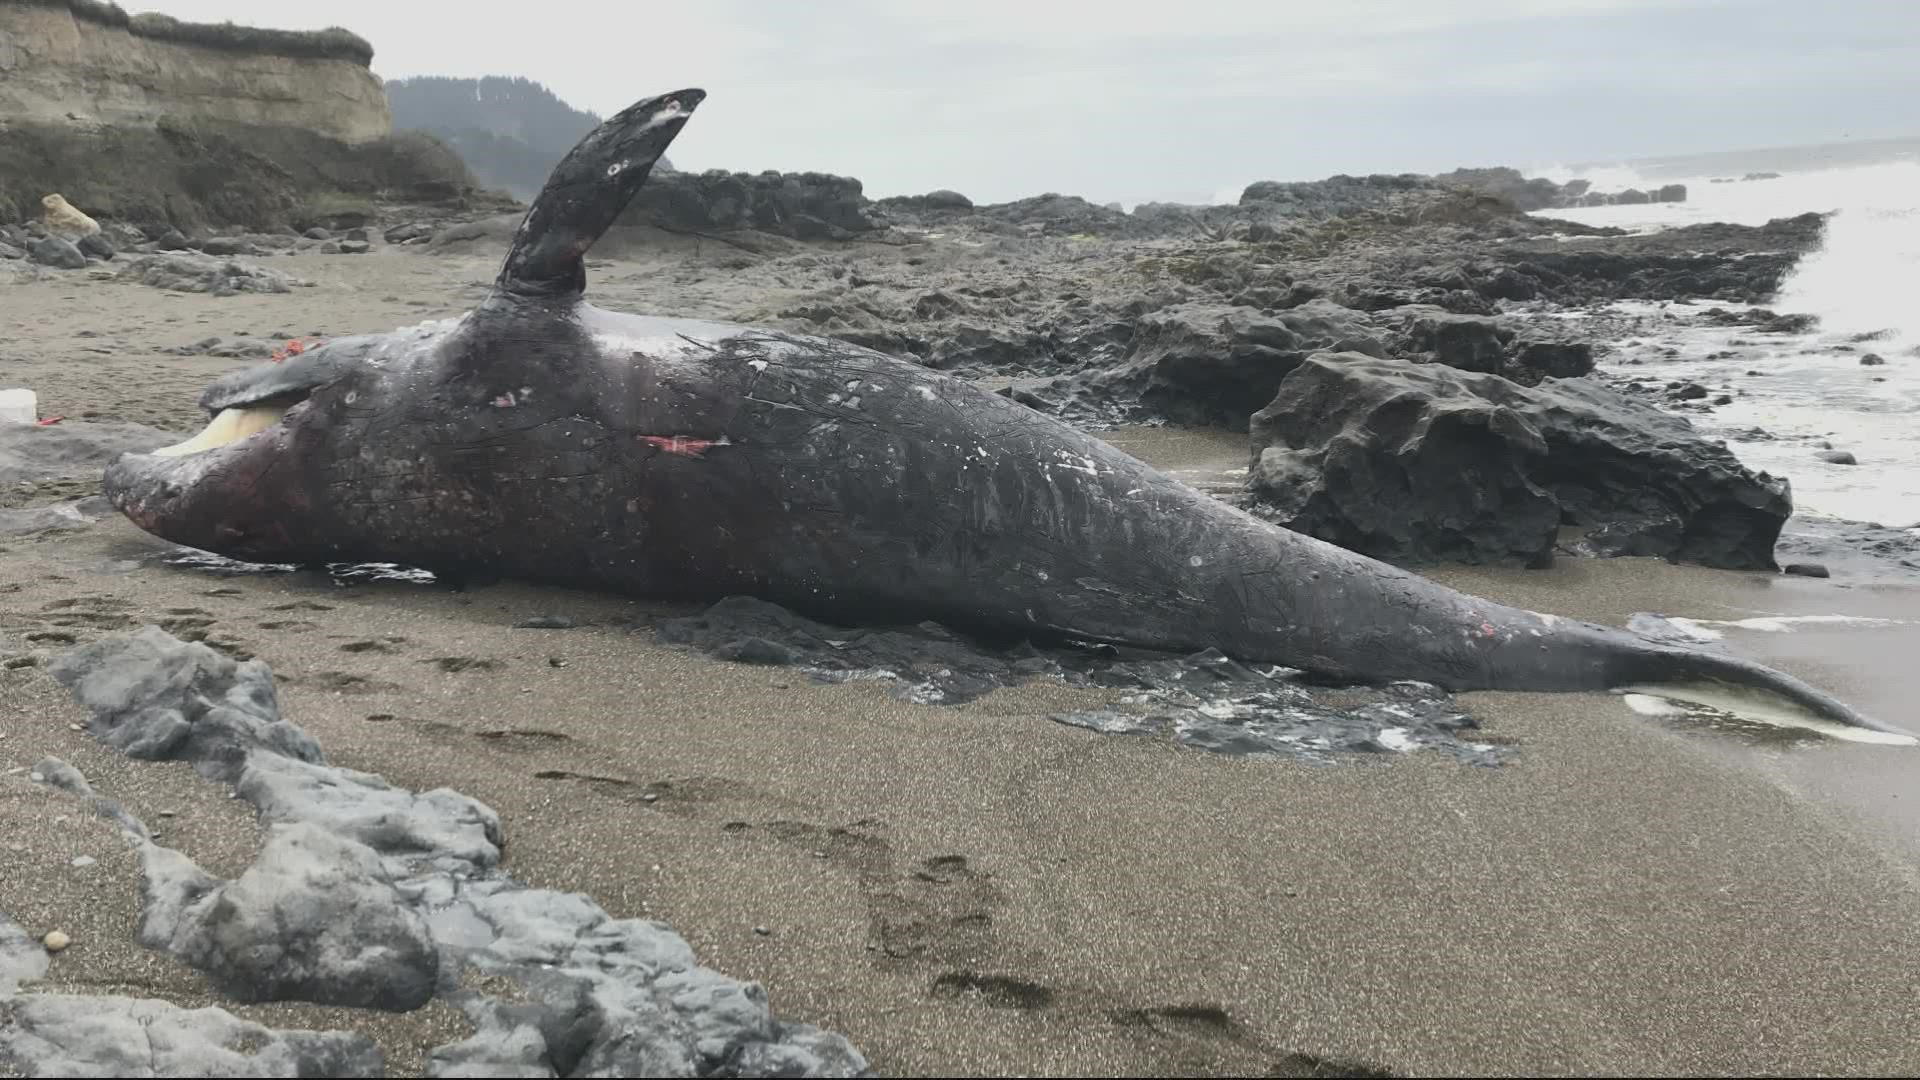 For the third time this year, a gray whale was stranded and washed ashore along the Oregon coast.